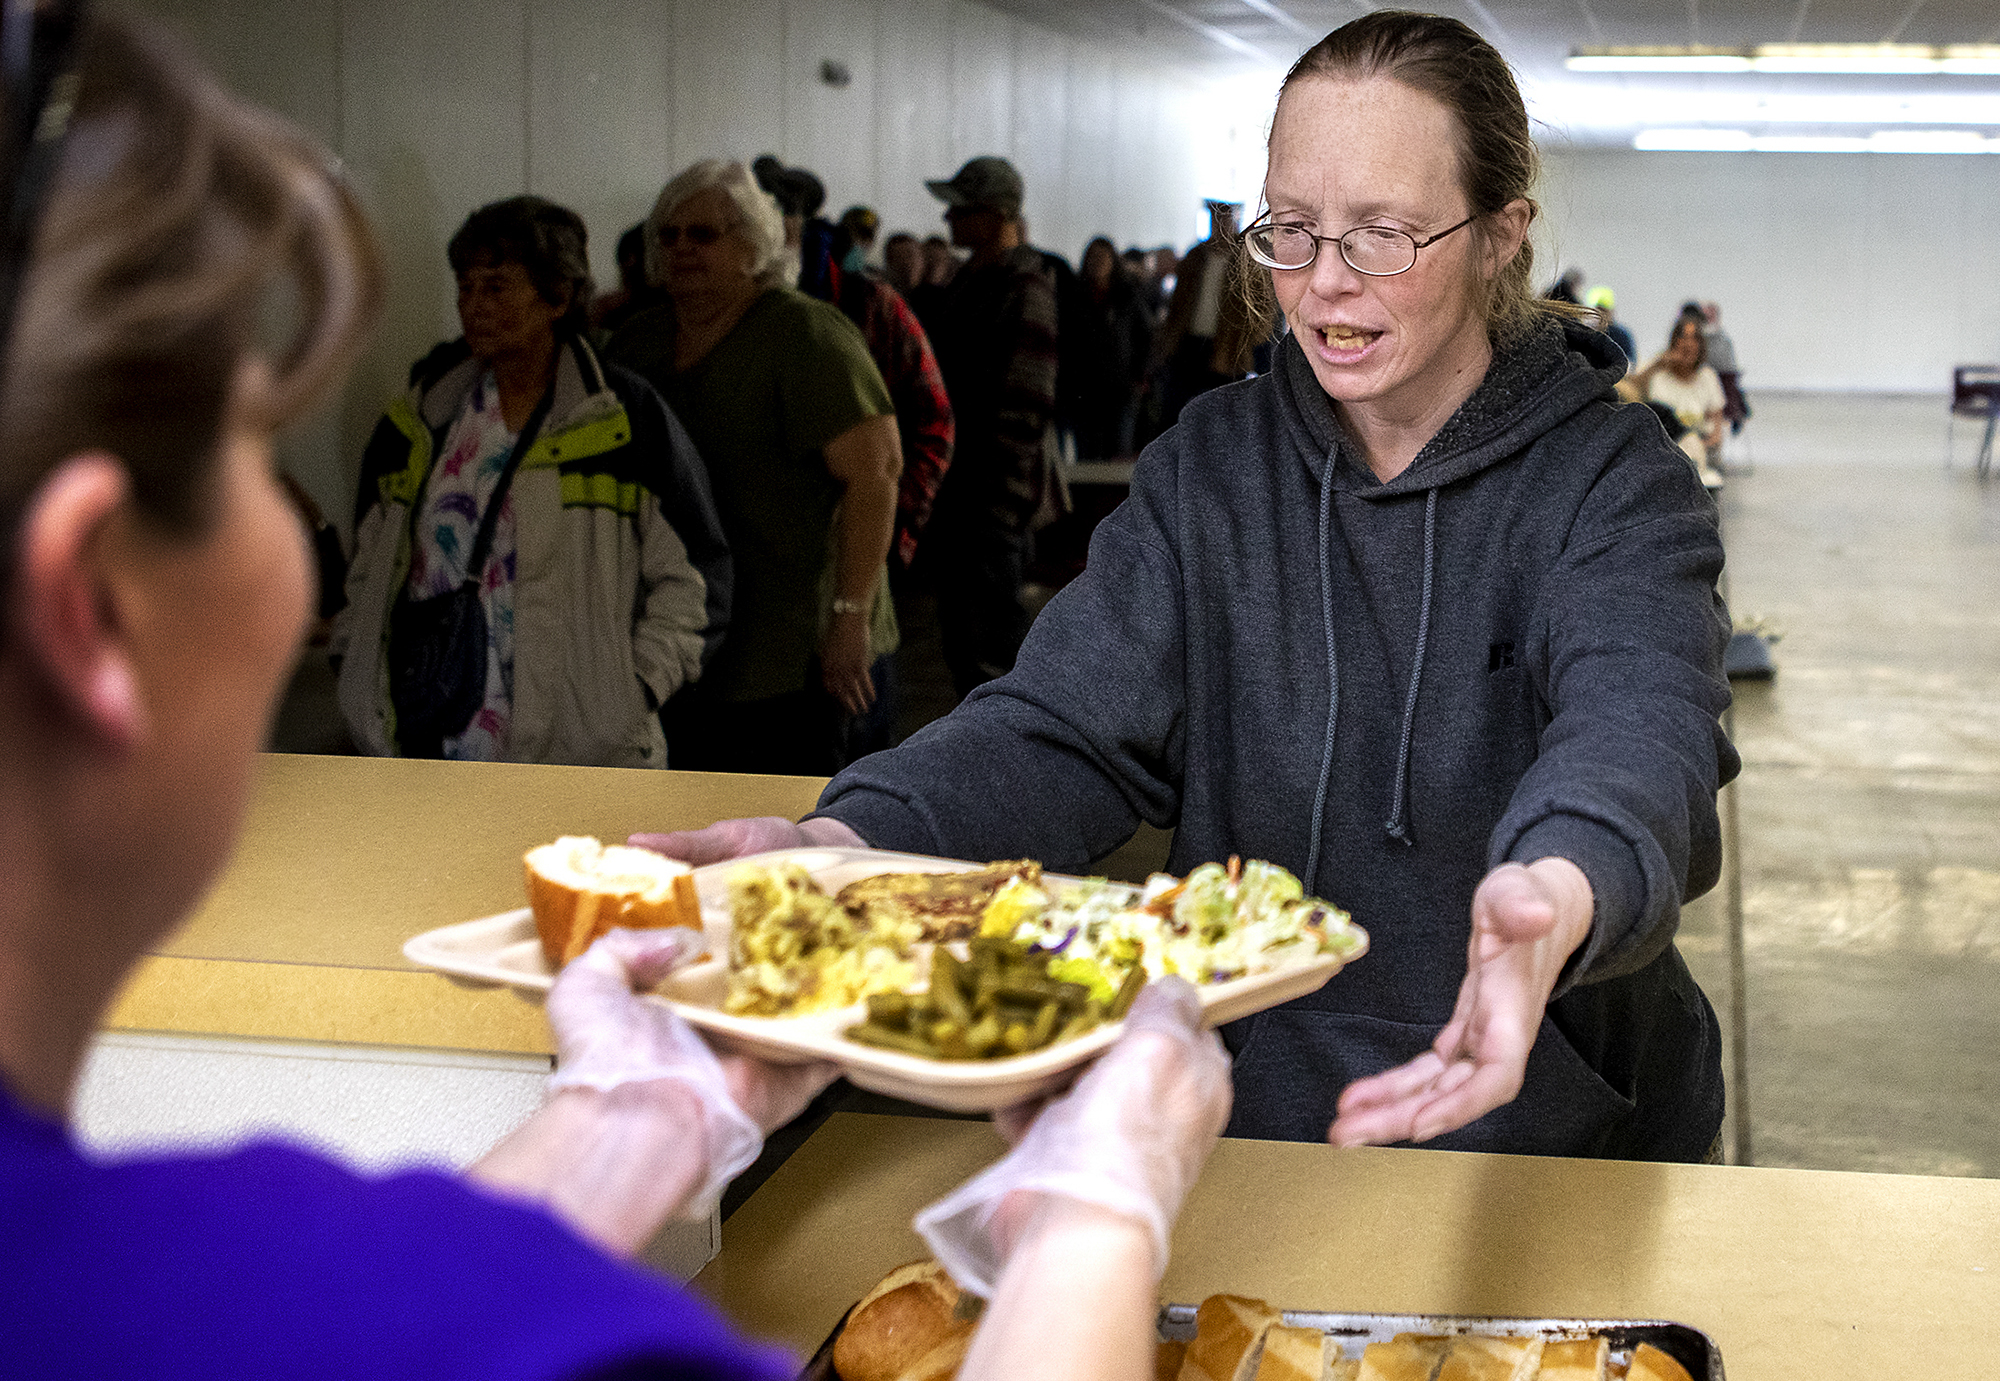  Andrea receives a tray of food at the Gillette Soup Kitchen. The meal is their one hot meal of the day. Resources offered by the Council of Community Services like the soup kitchen have been a great help to Andrea and her family. "There is hope out 